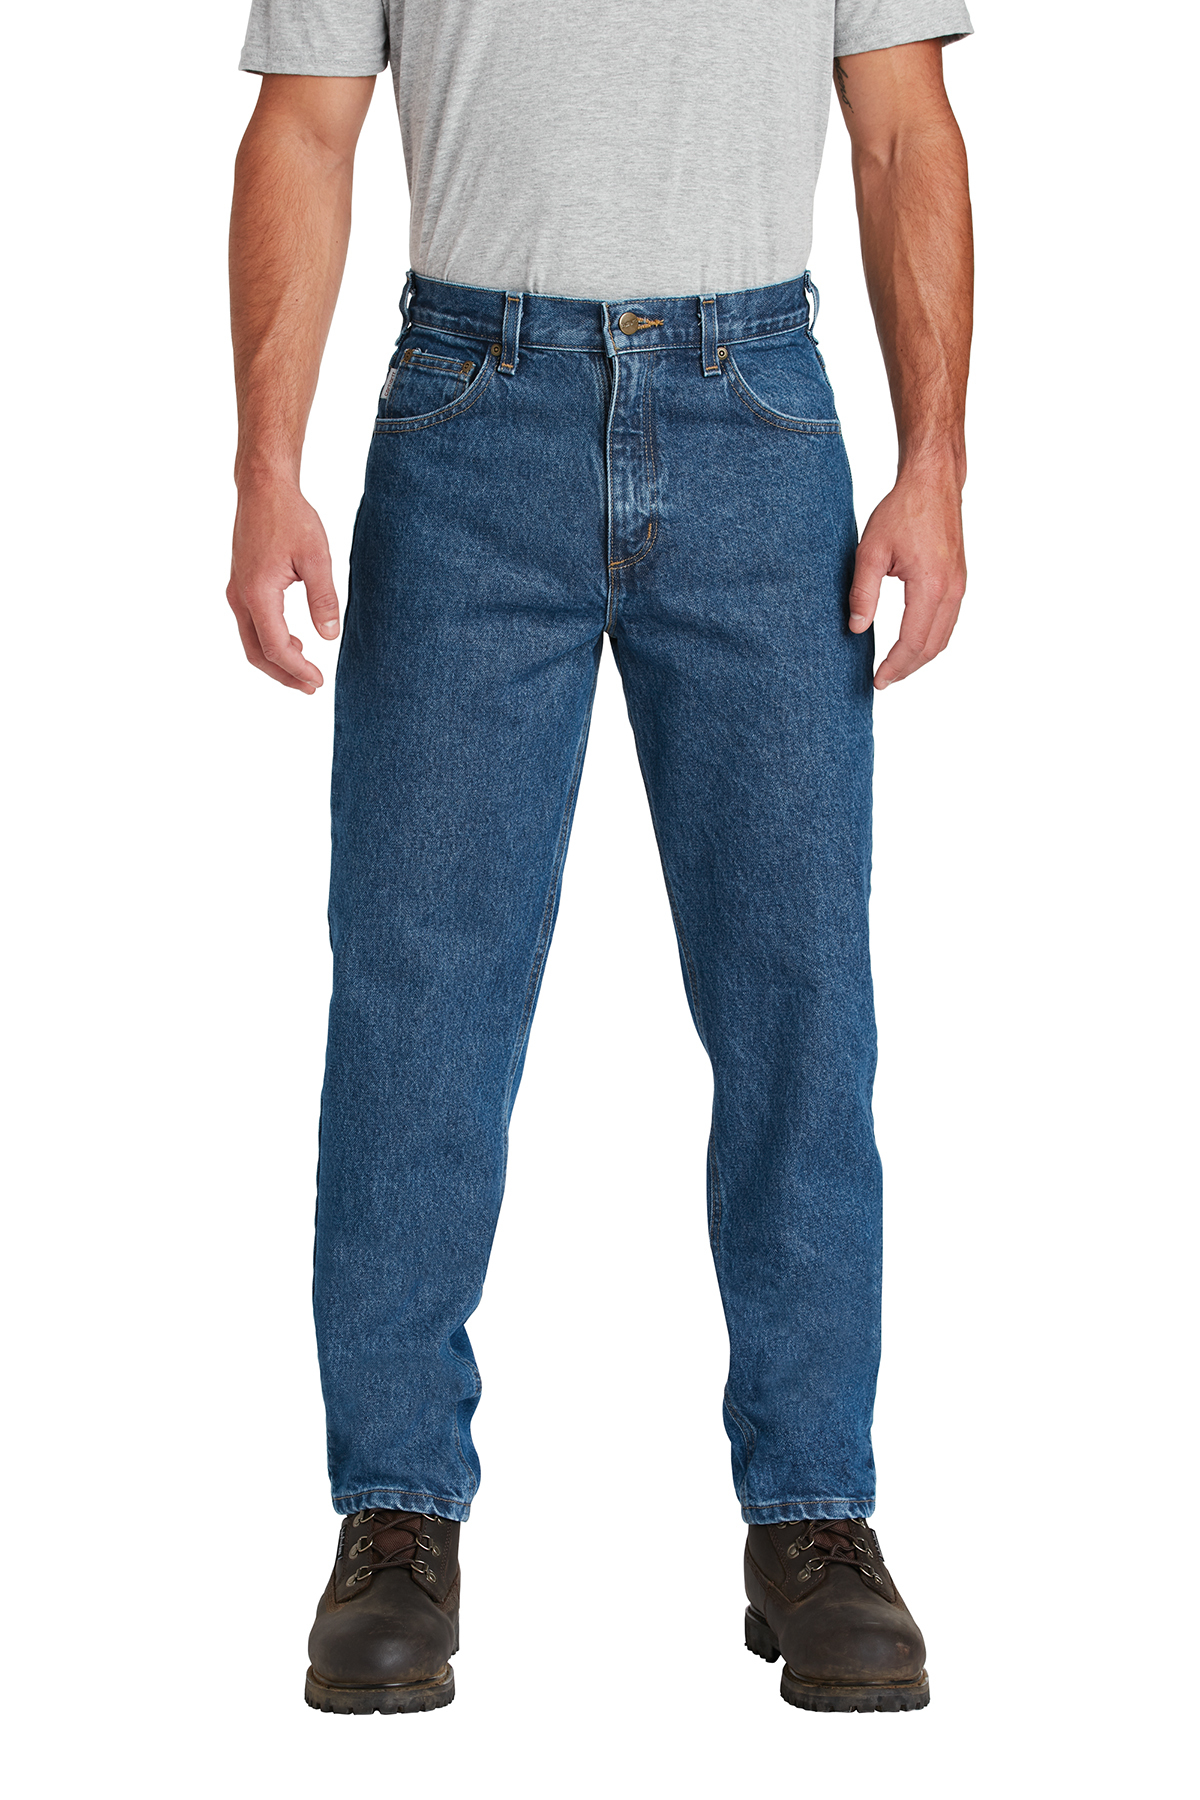 CTB17   Carhartt ® Relaxed-Fit Tapered-Leg Jean